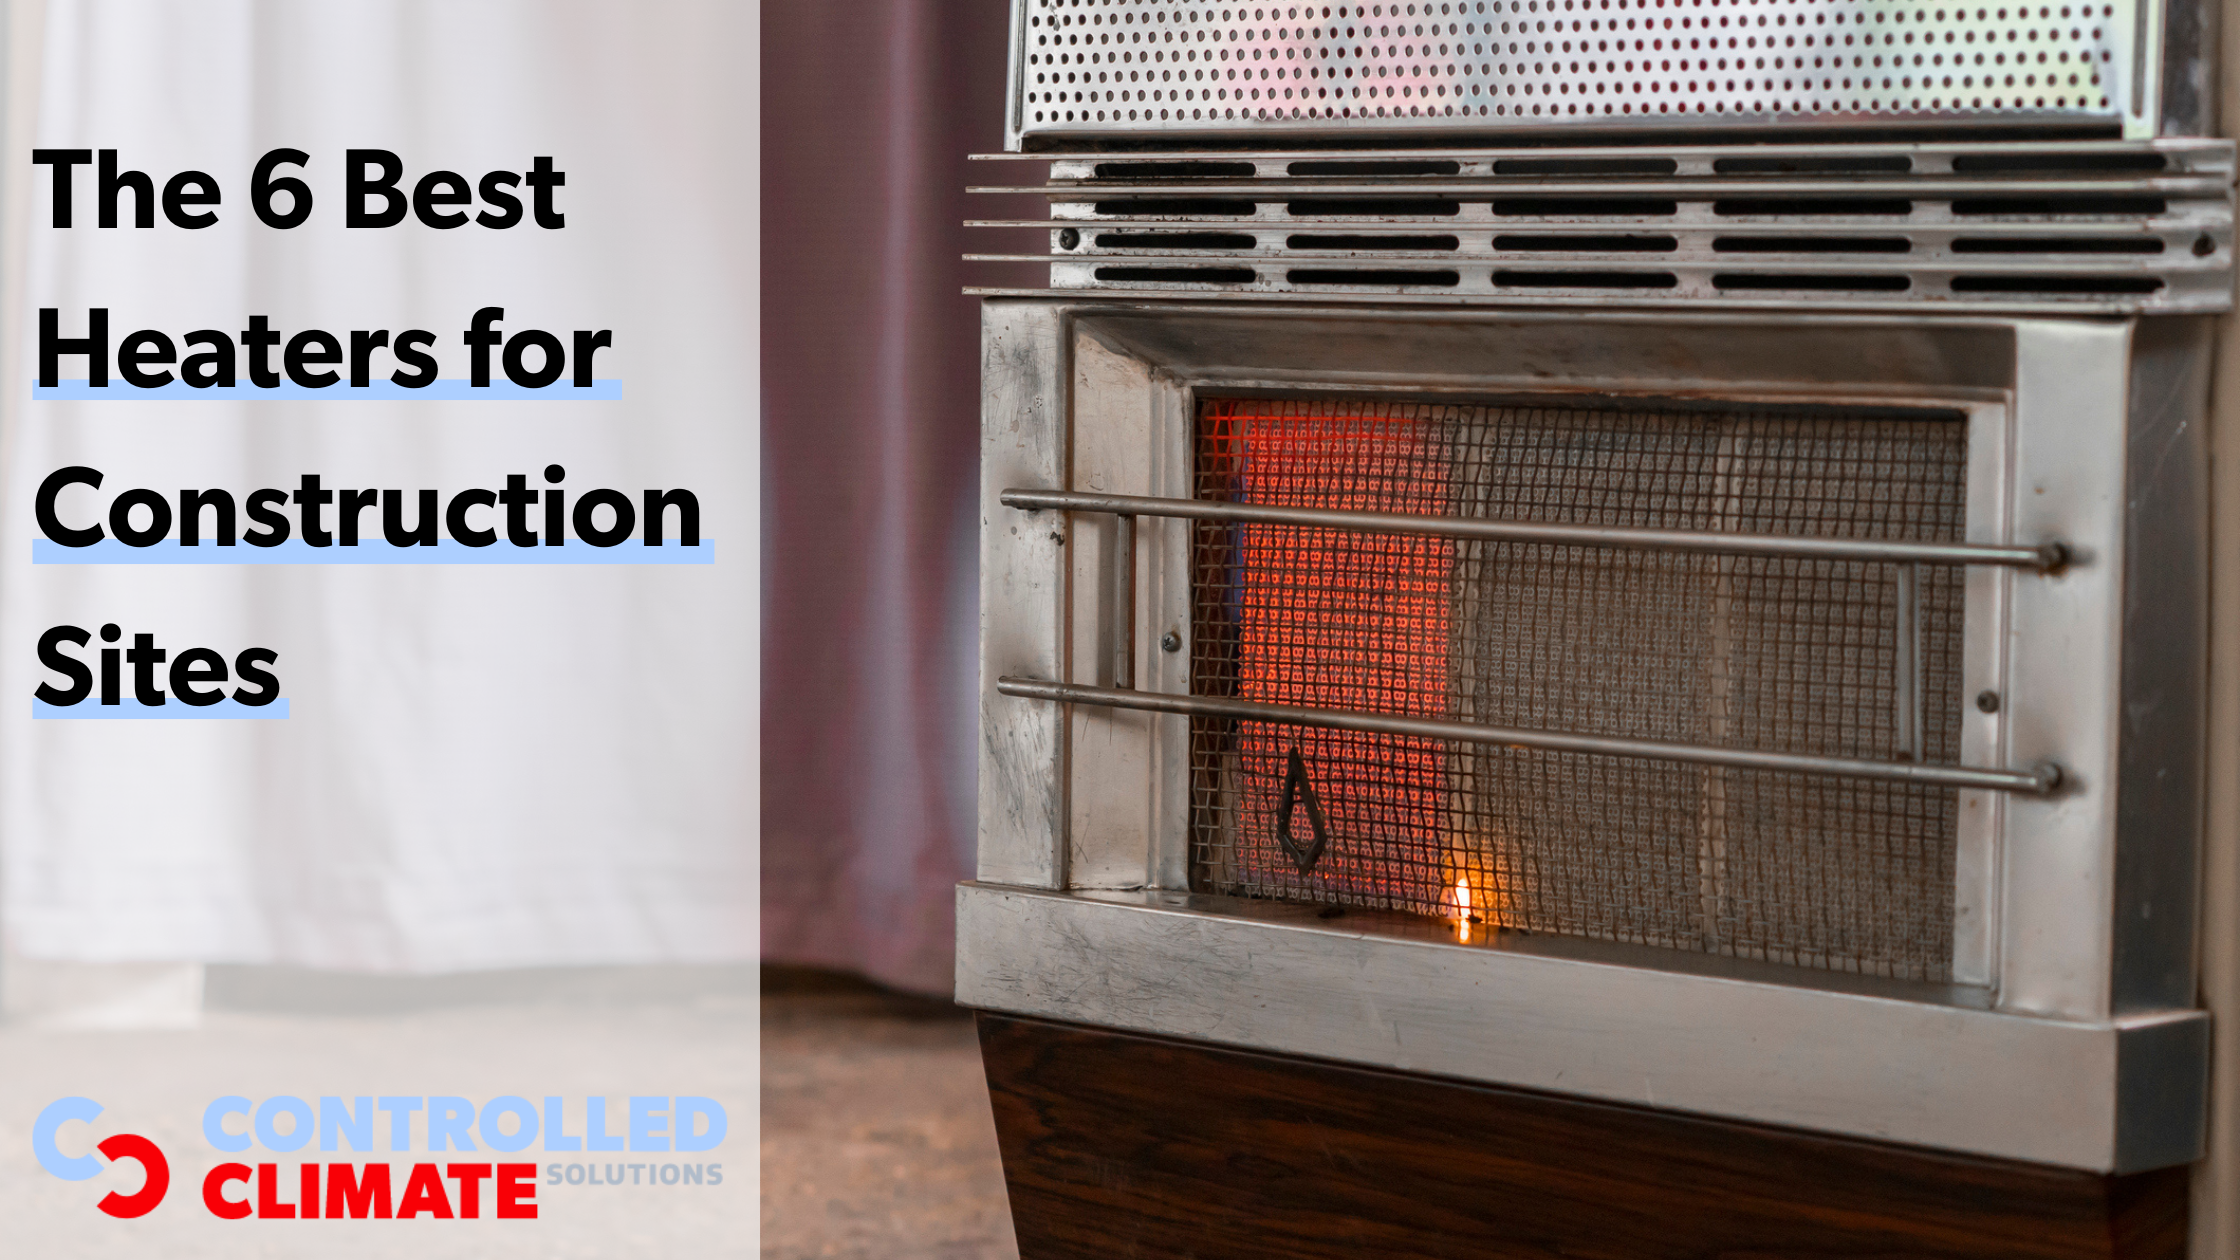 The 6 Best Heaters for Construction Sites - Featured Image